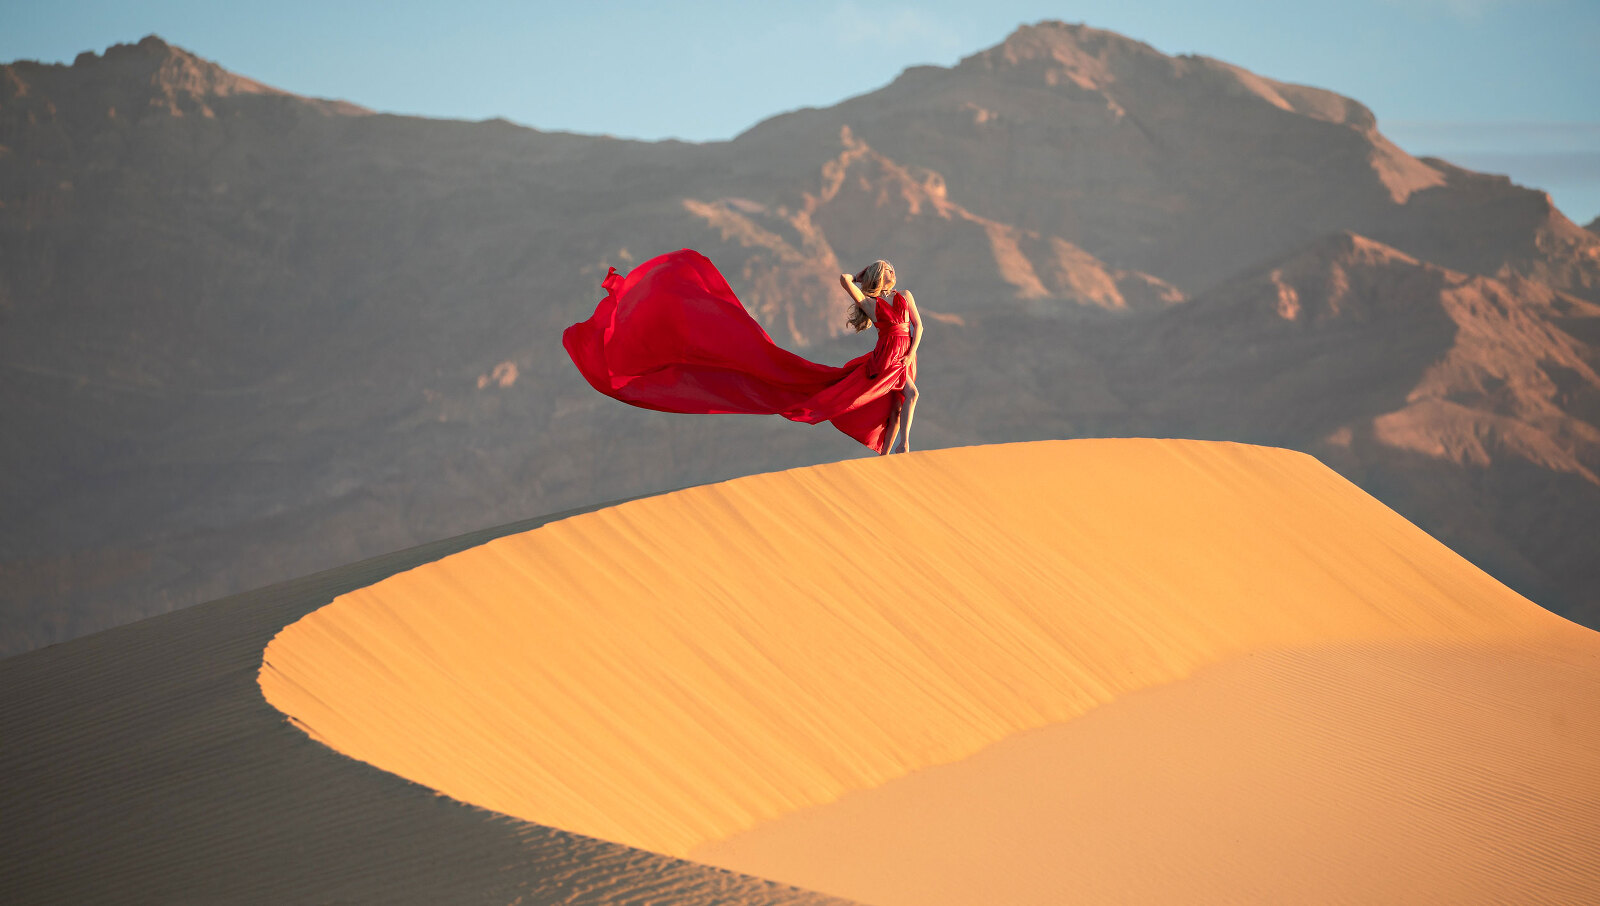 Woman on top of sand dune in a red, long dress with mountain.